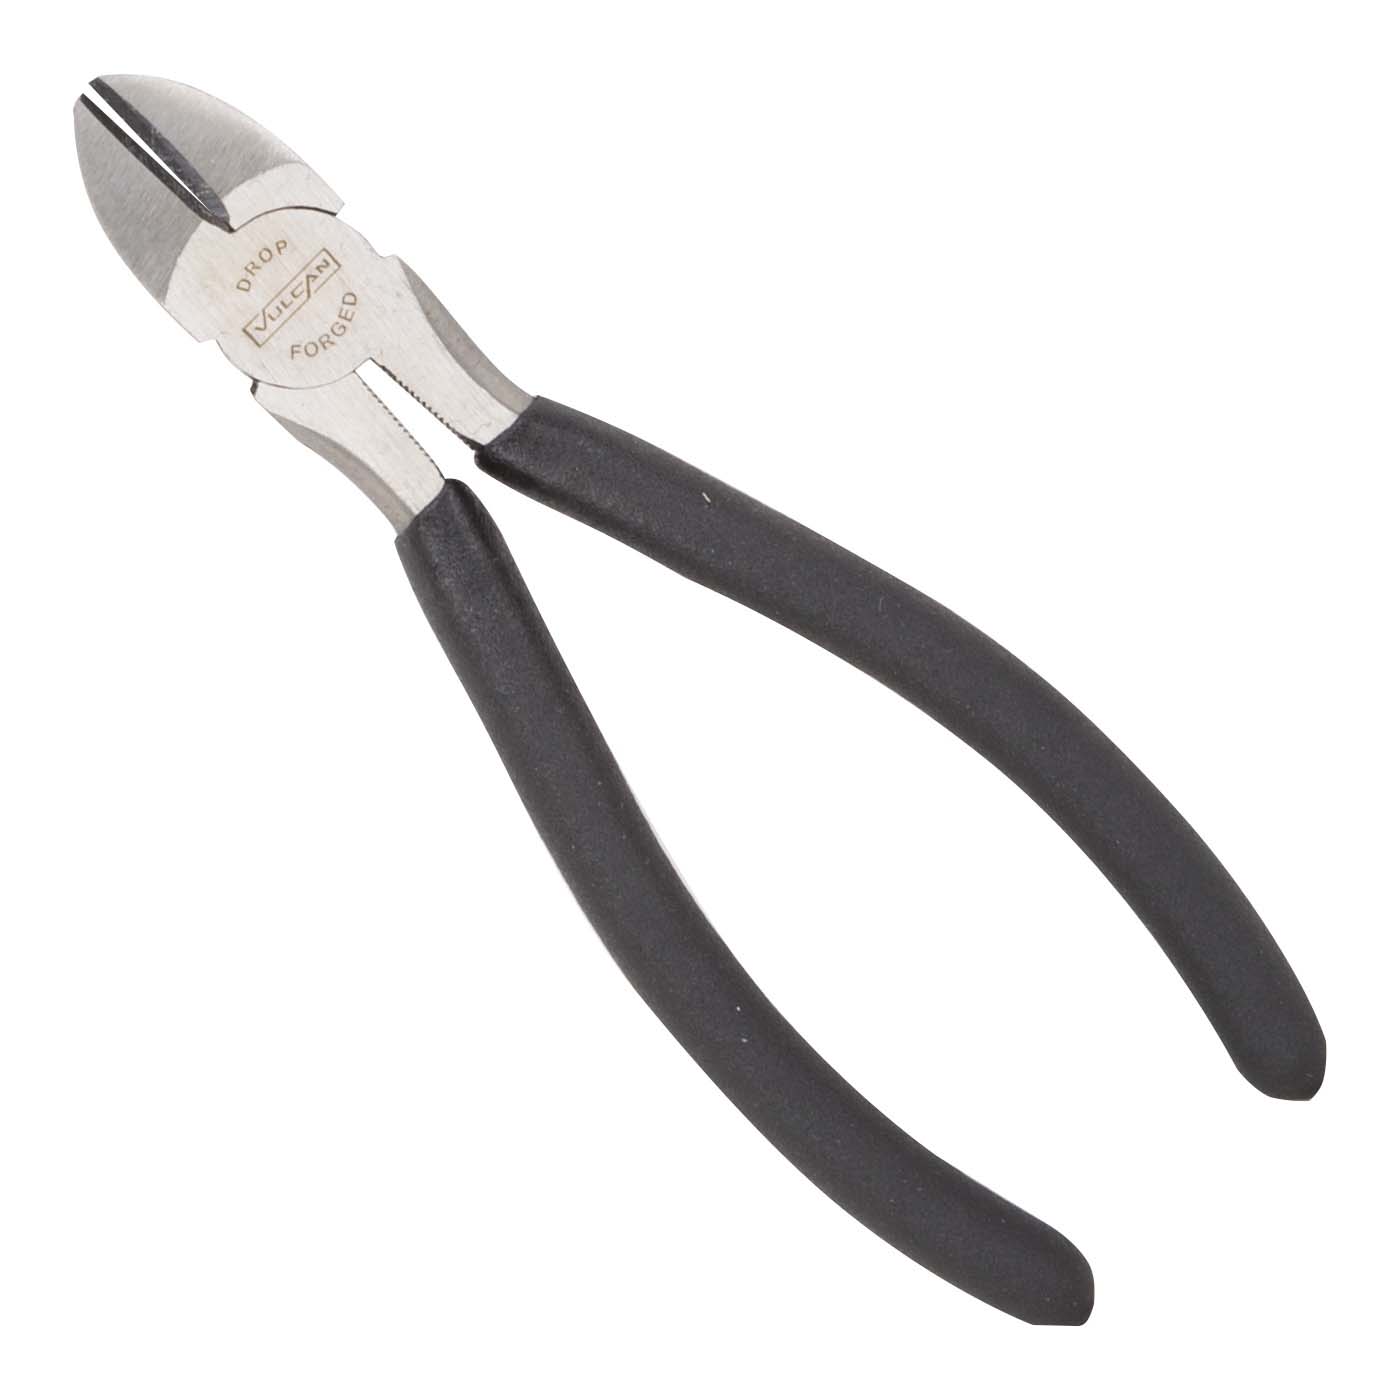 JL-NP006 Diagonal Cutting Plier, 6 in OAL, 1 mm Cutting Capacity, 0.75 in Jaw Opening, Black Handle